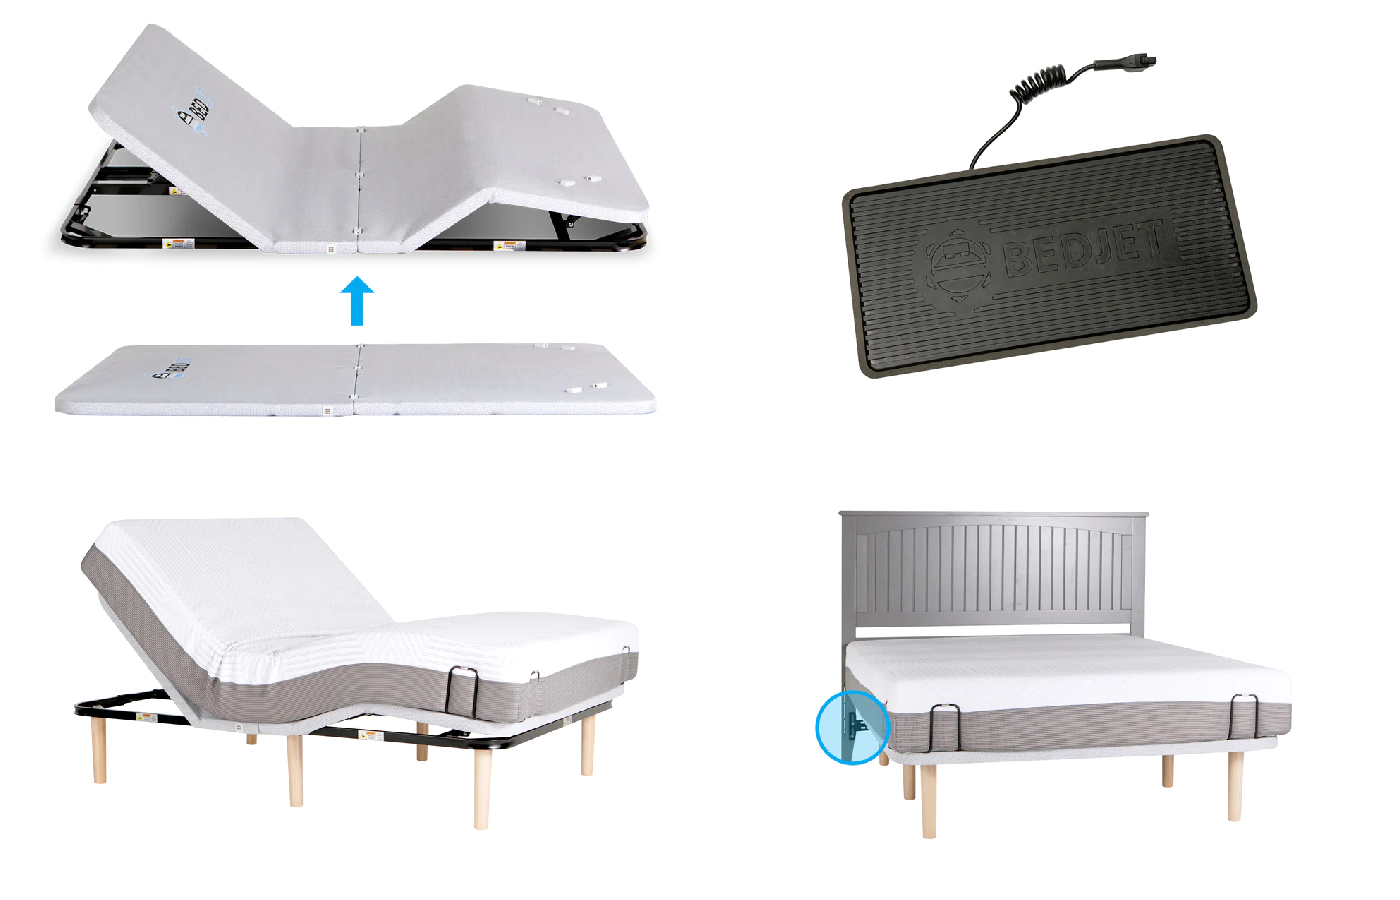 5 Best Bedjet Sleep Systems You Will Love